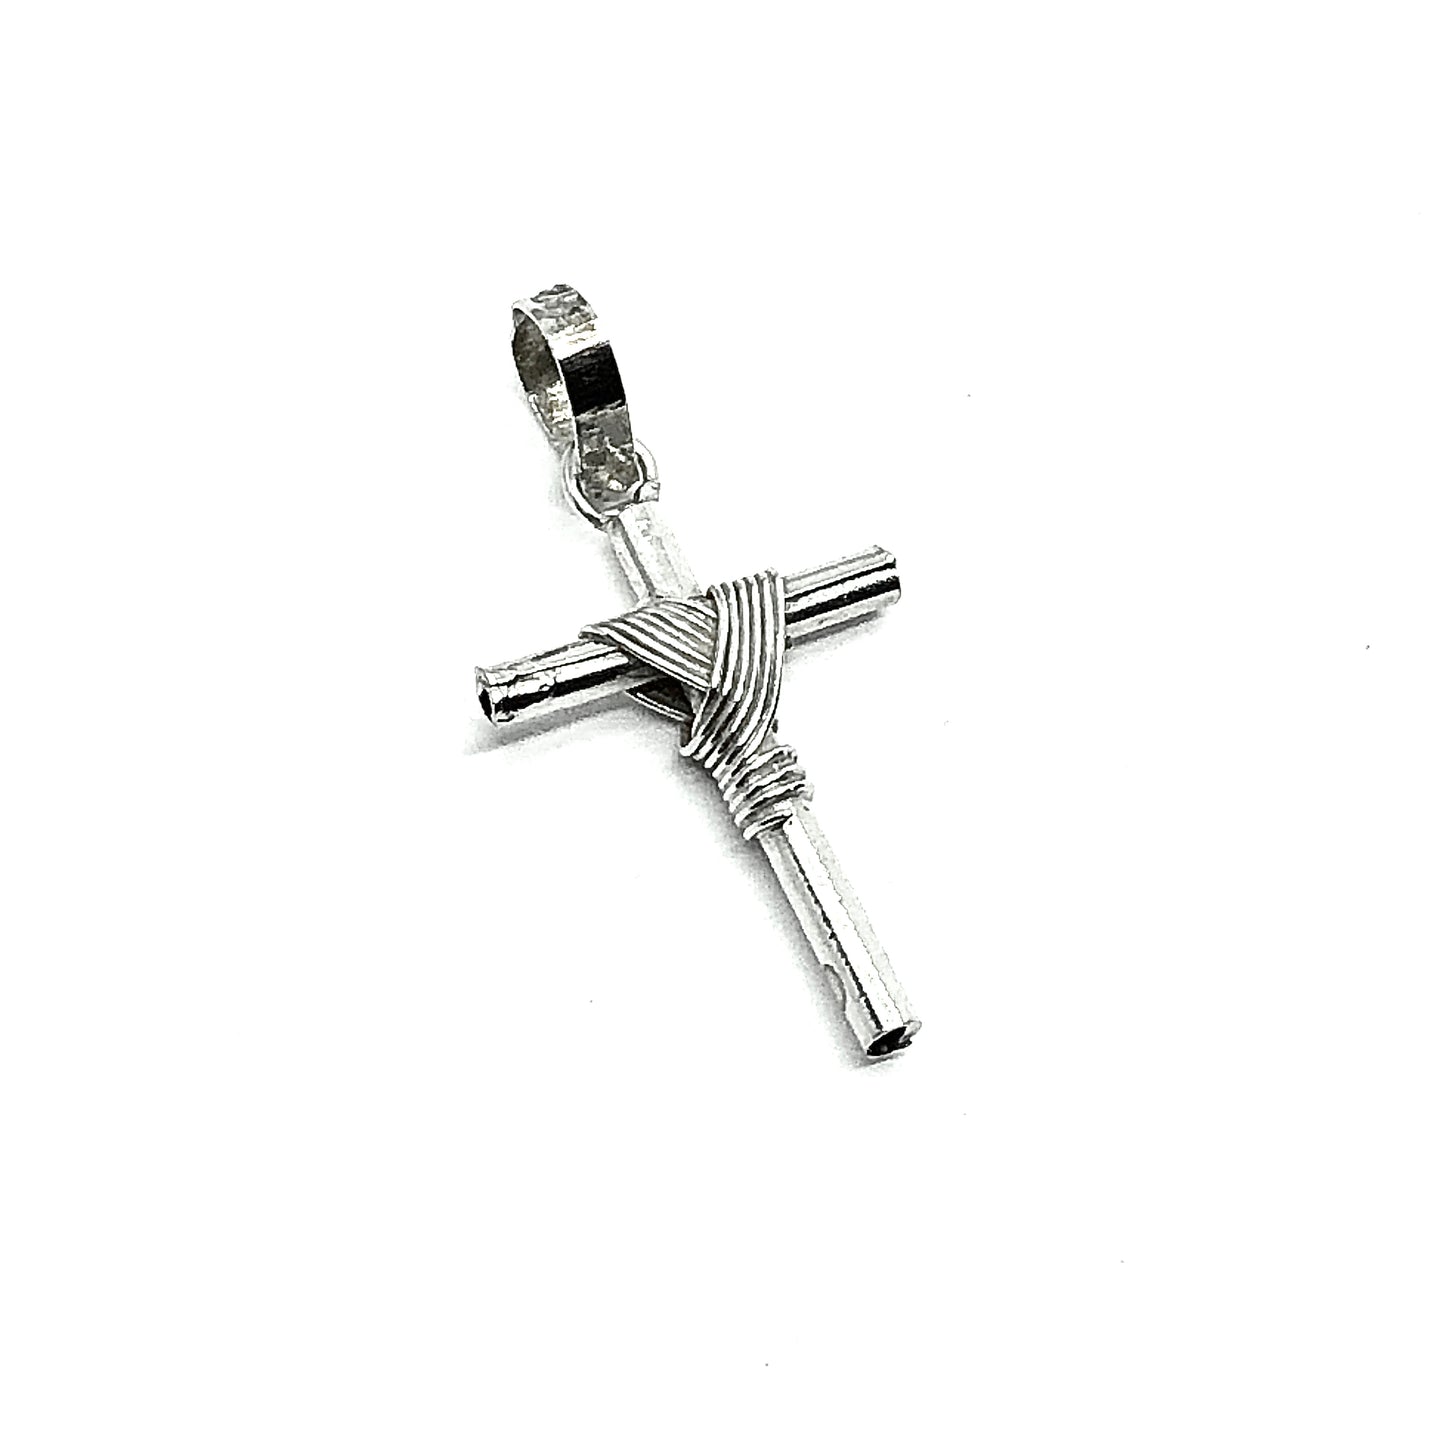 Charms & Pendants | Vintage Sterling Shrouded Religious Silver Small Cross Pendant